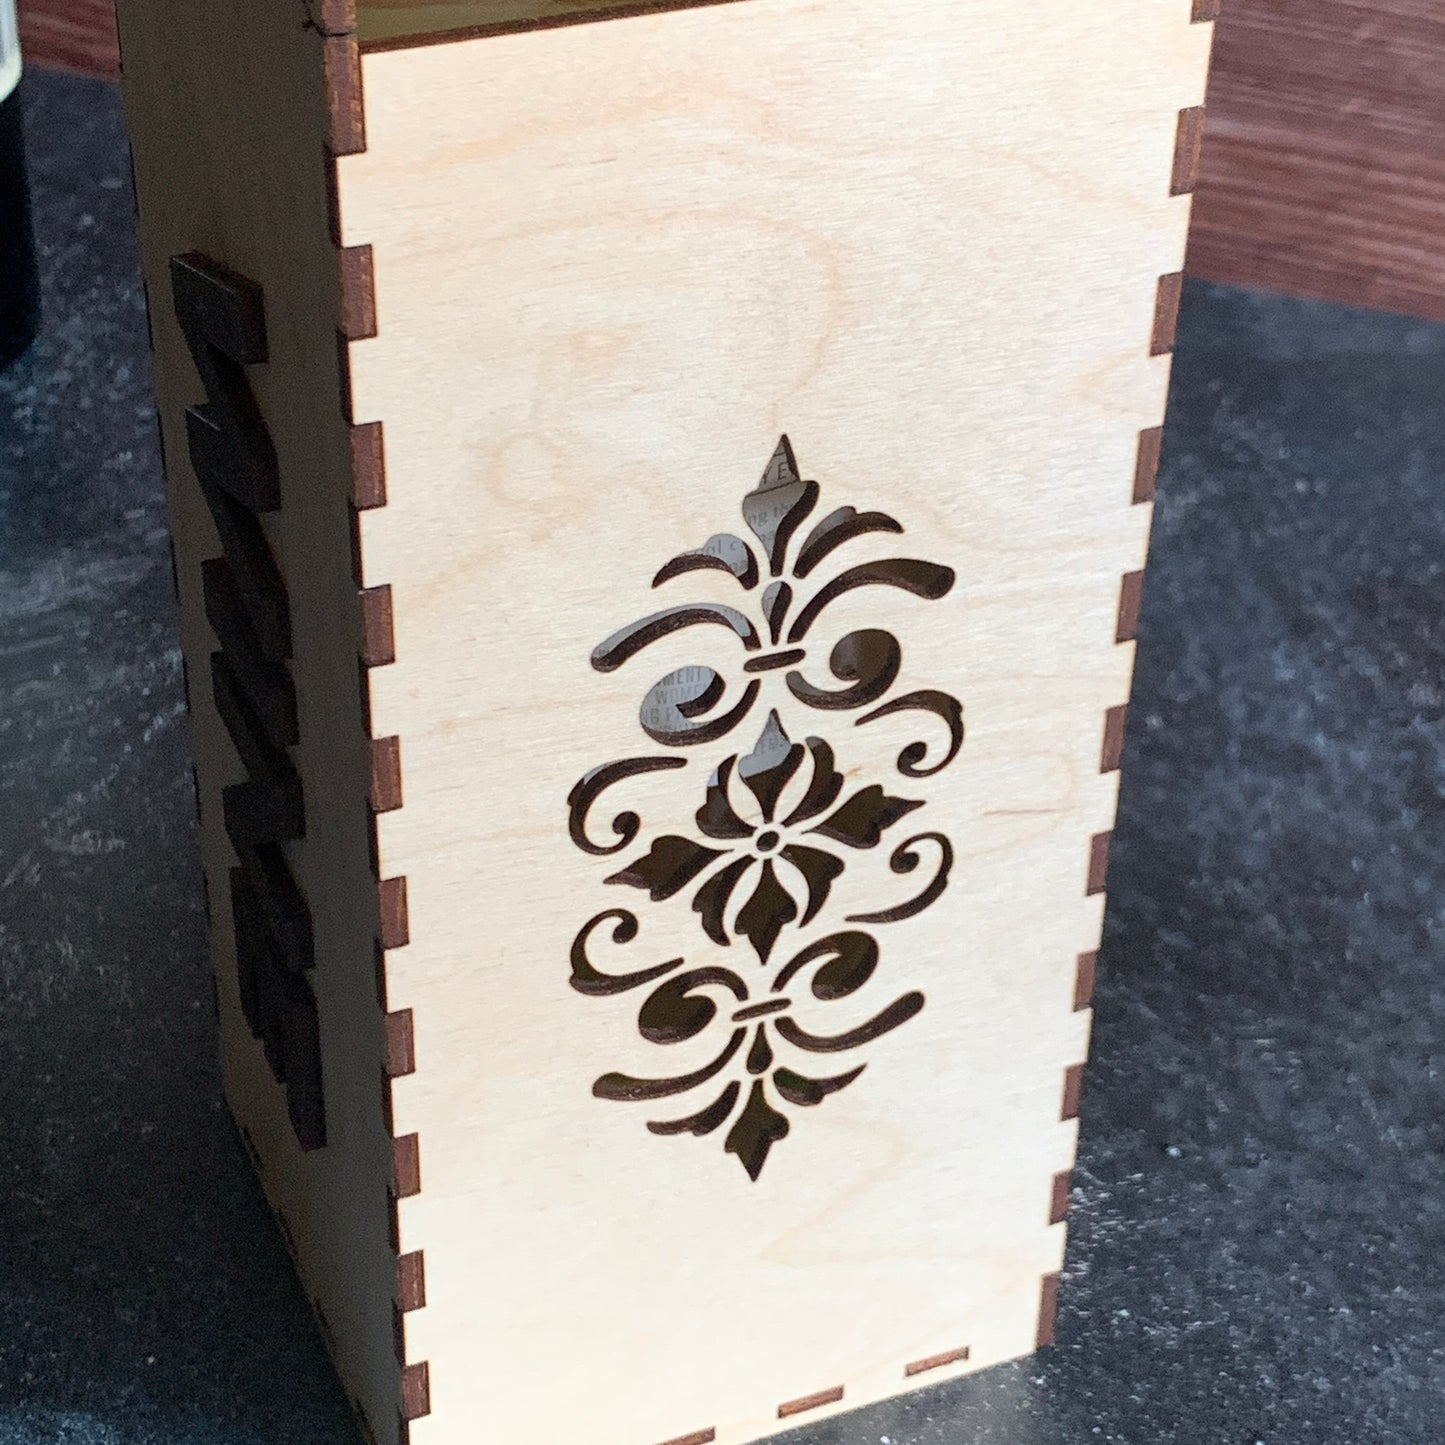 Wine Carrier Gift Box with handle, 4-sided design, add your name or monogram